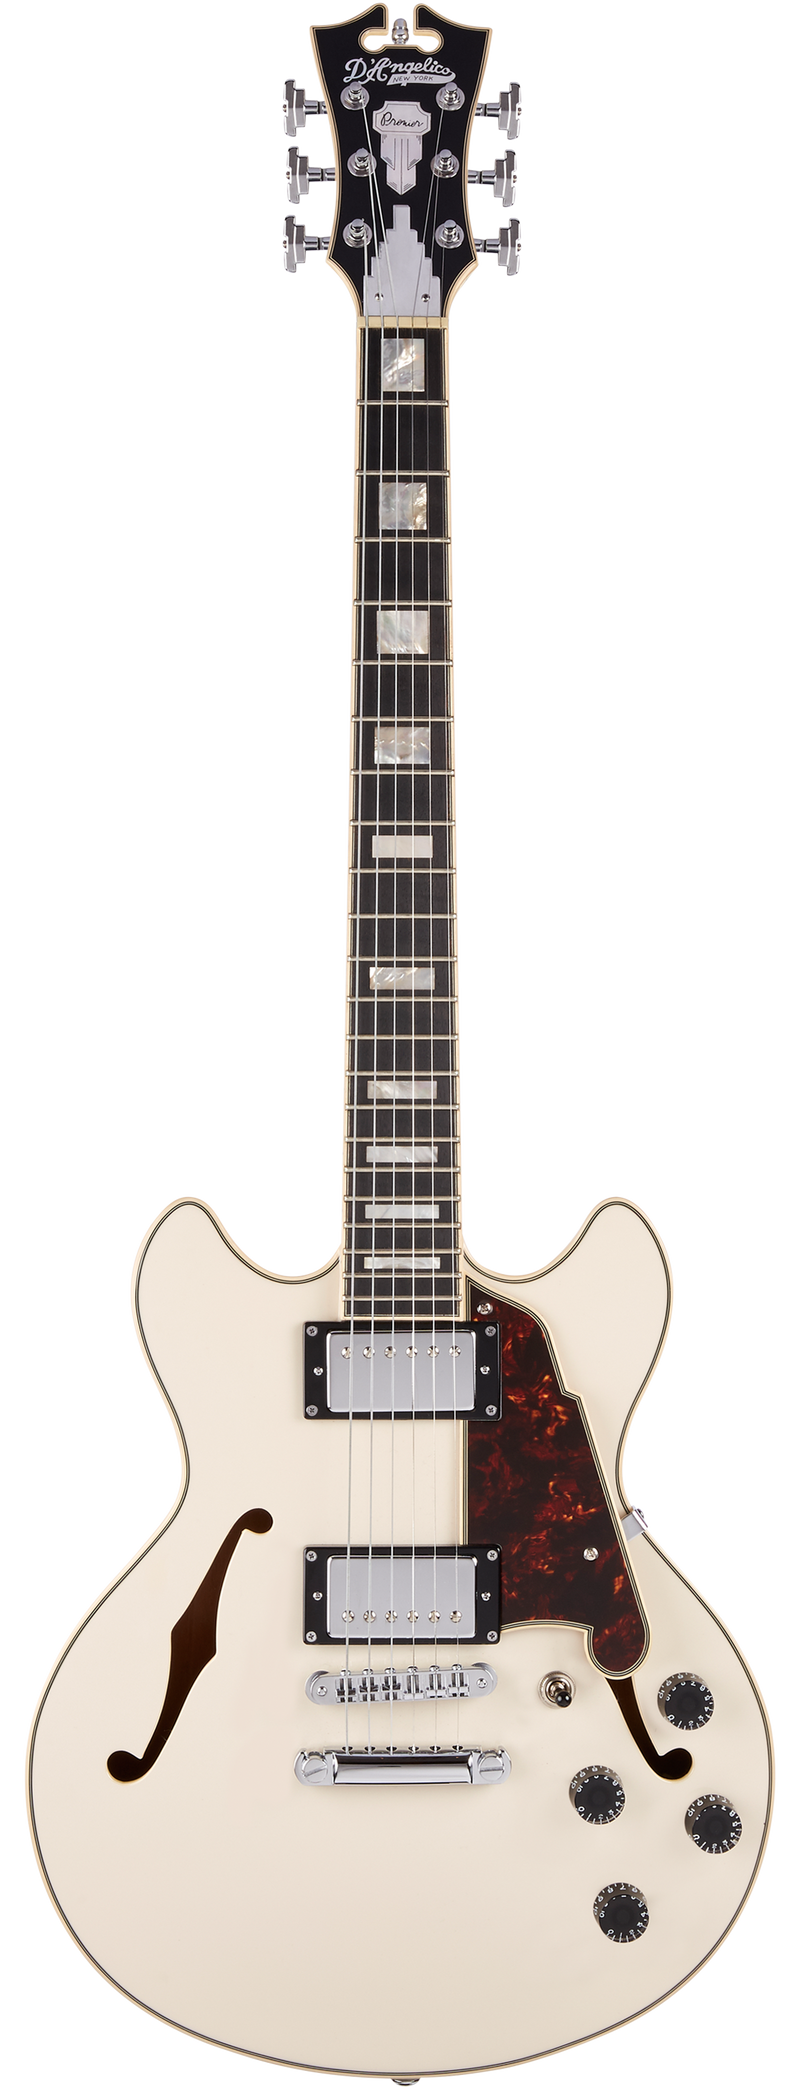 D'Angelico DAPMINIDCCMPCSCB Semi Hollow-Body Mini Electric Guitar (Champagne)